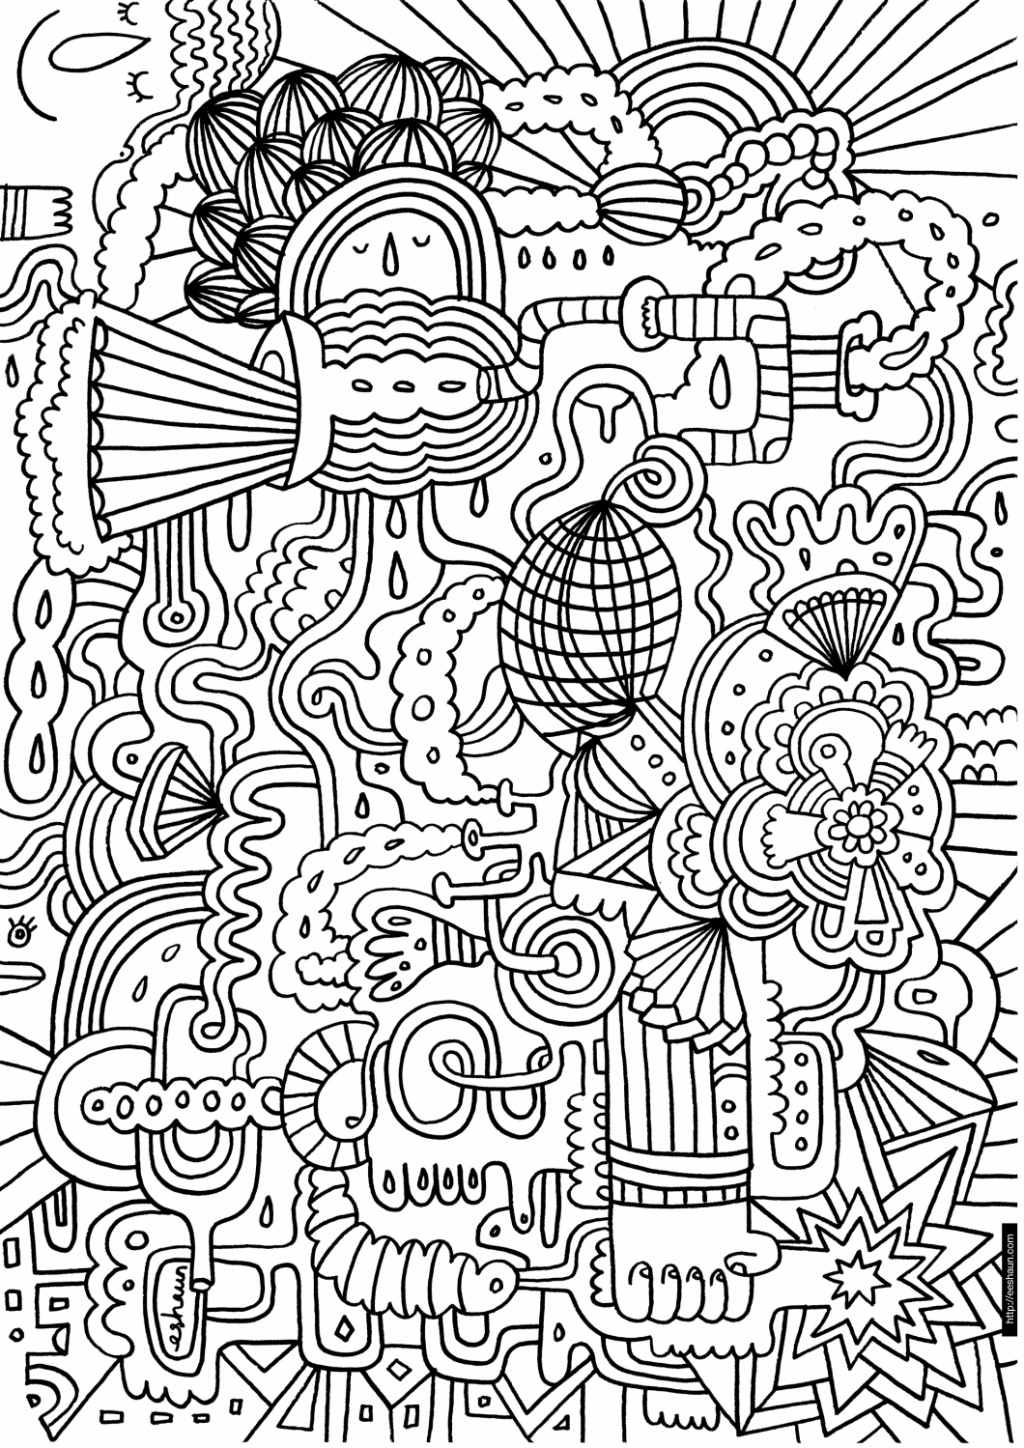 Coloring Page ~ Harding Pages Free Large Sheets Printable Childrens - Free Printable Murals